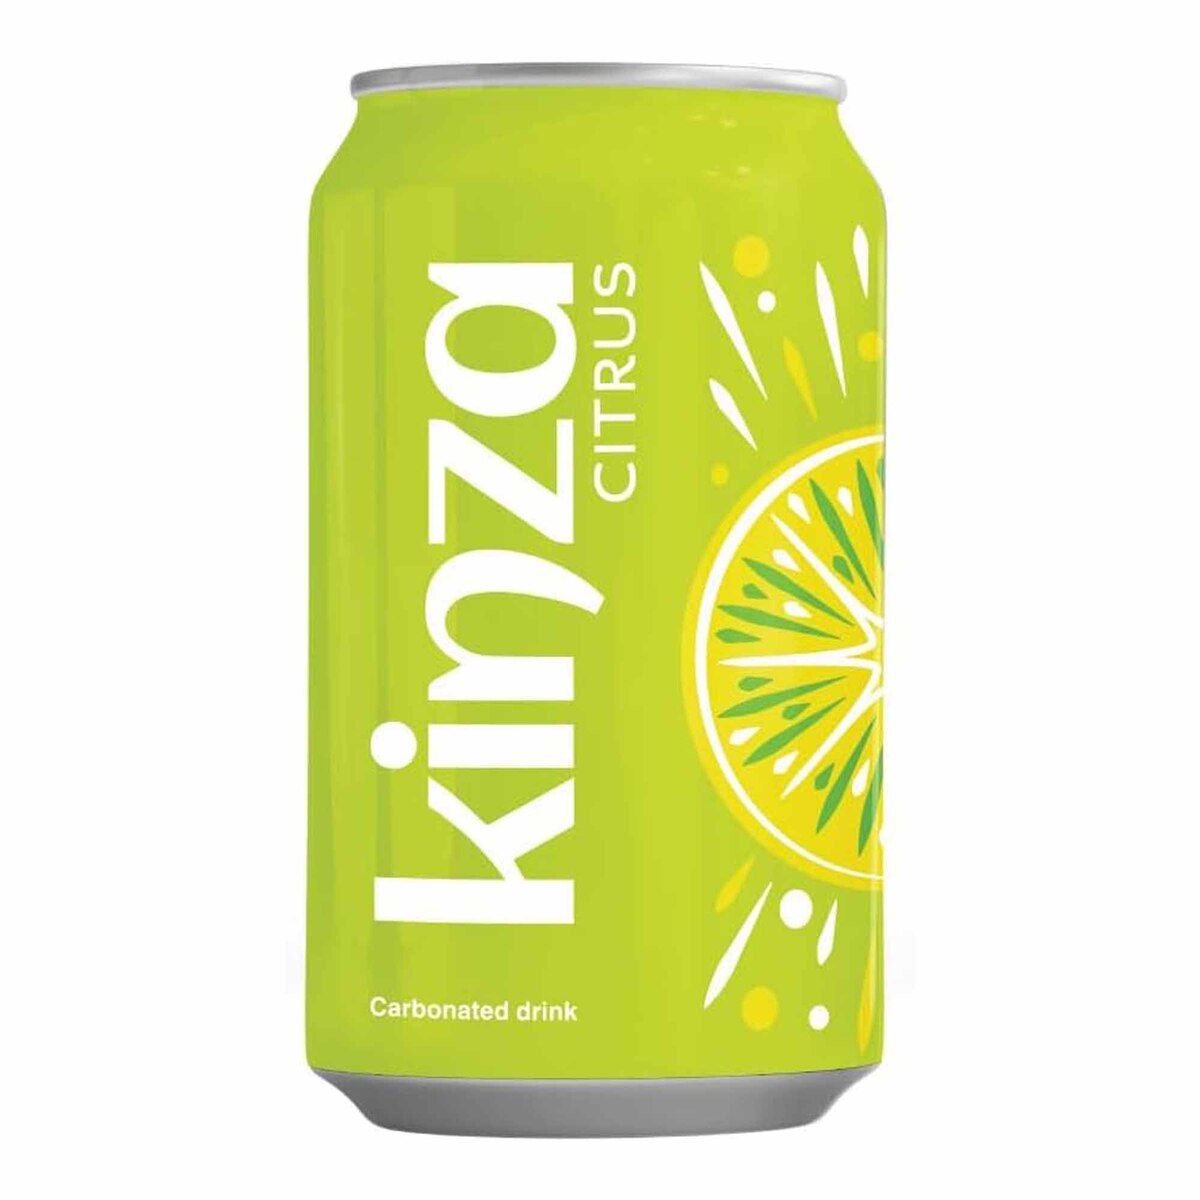 Kinza Citrus Carbonated Drink 360 ml